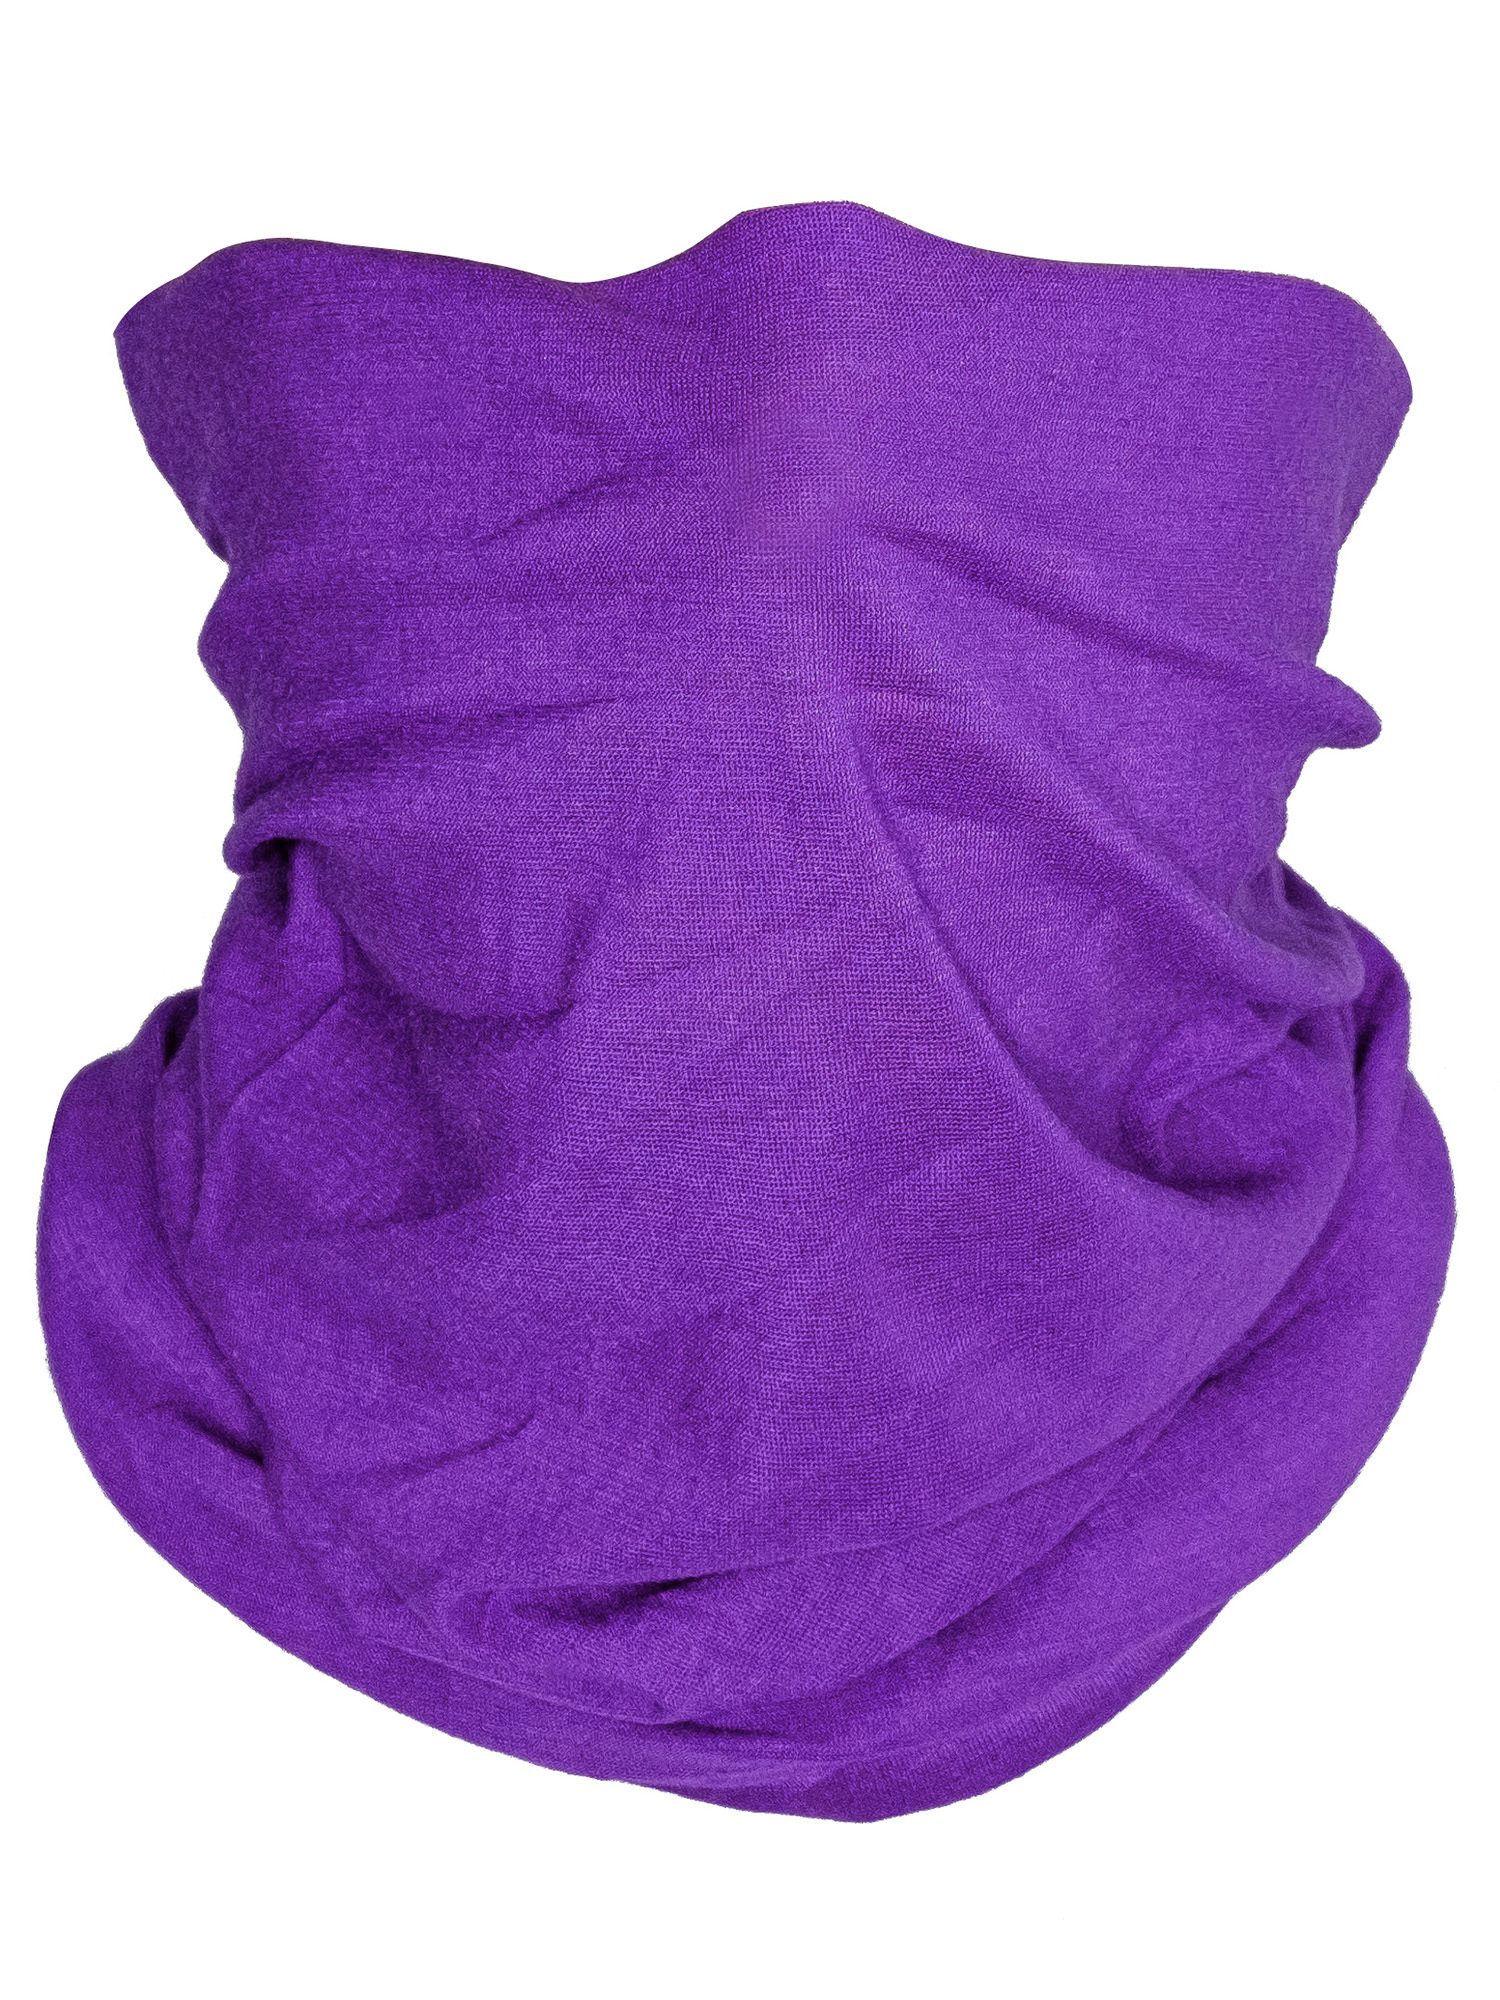 Top Headwear Multifunctional Face Covering Neck Gaiter Scarf - Purple - image 1 of 2